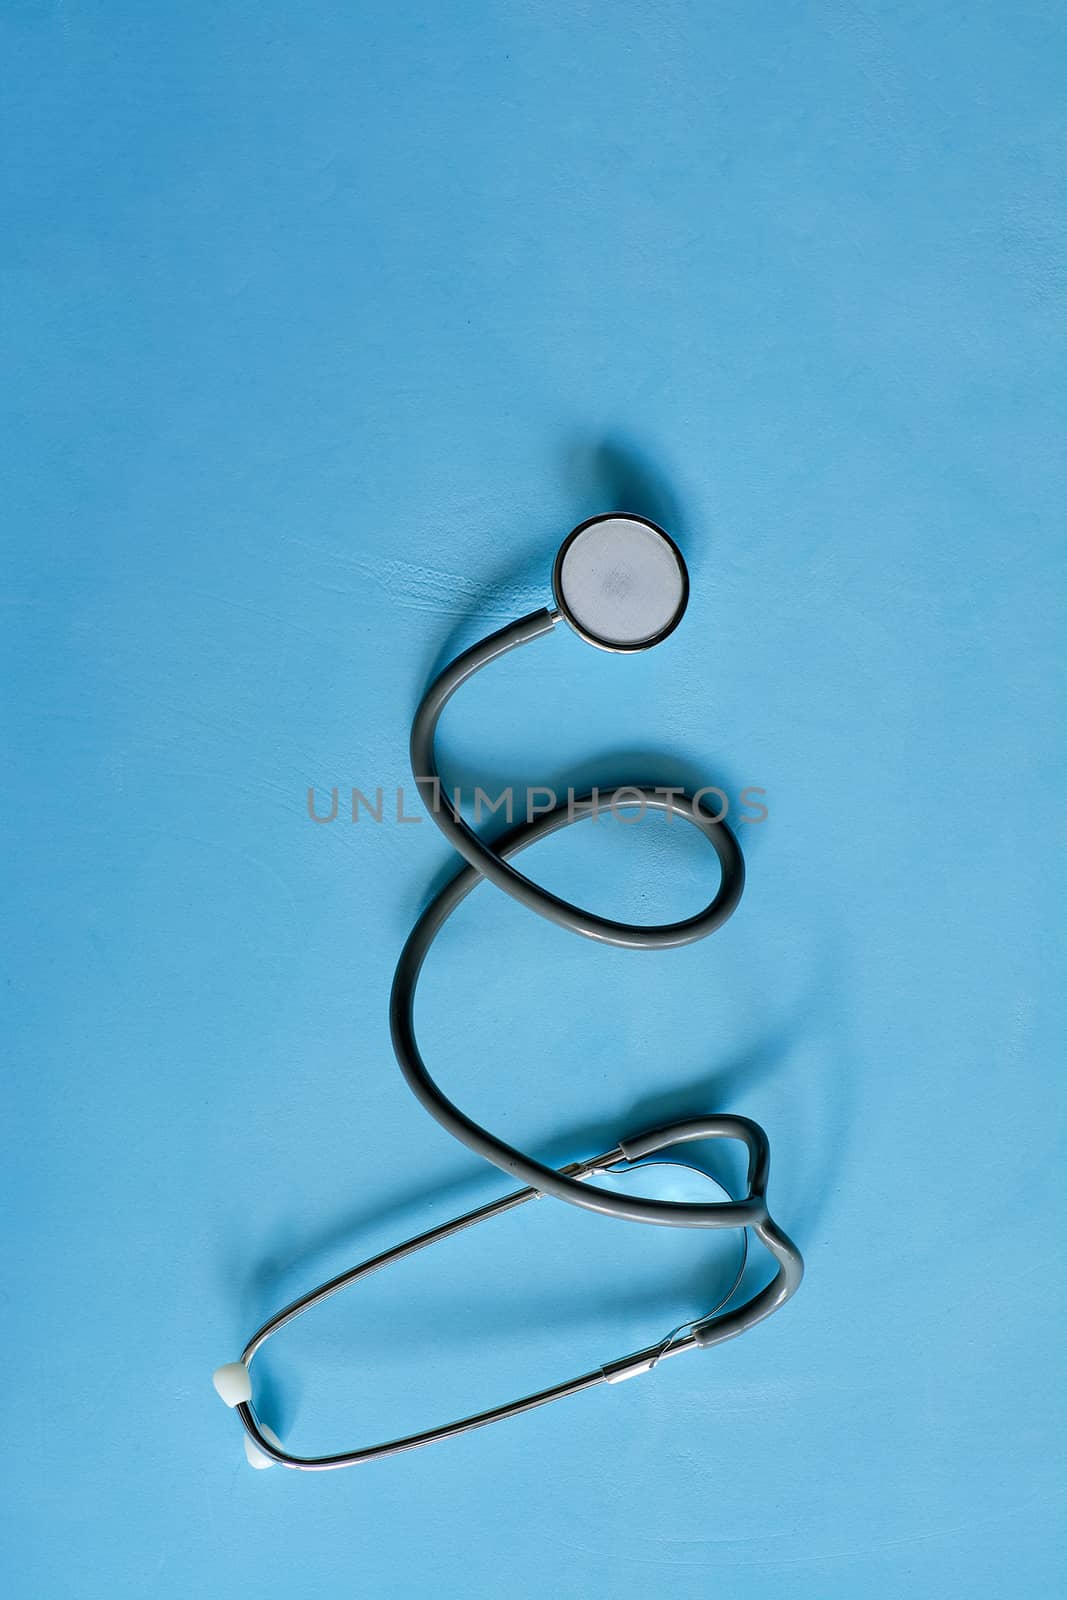 Phonendoscope stethoscope on blue background with copy space for text. Health life medicine concept.